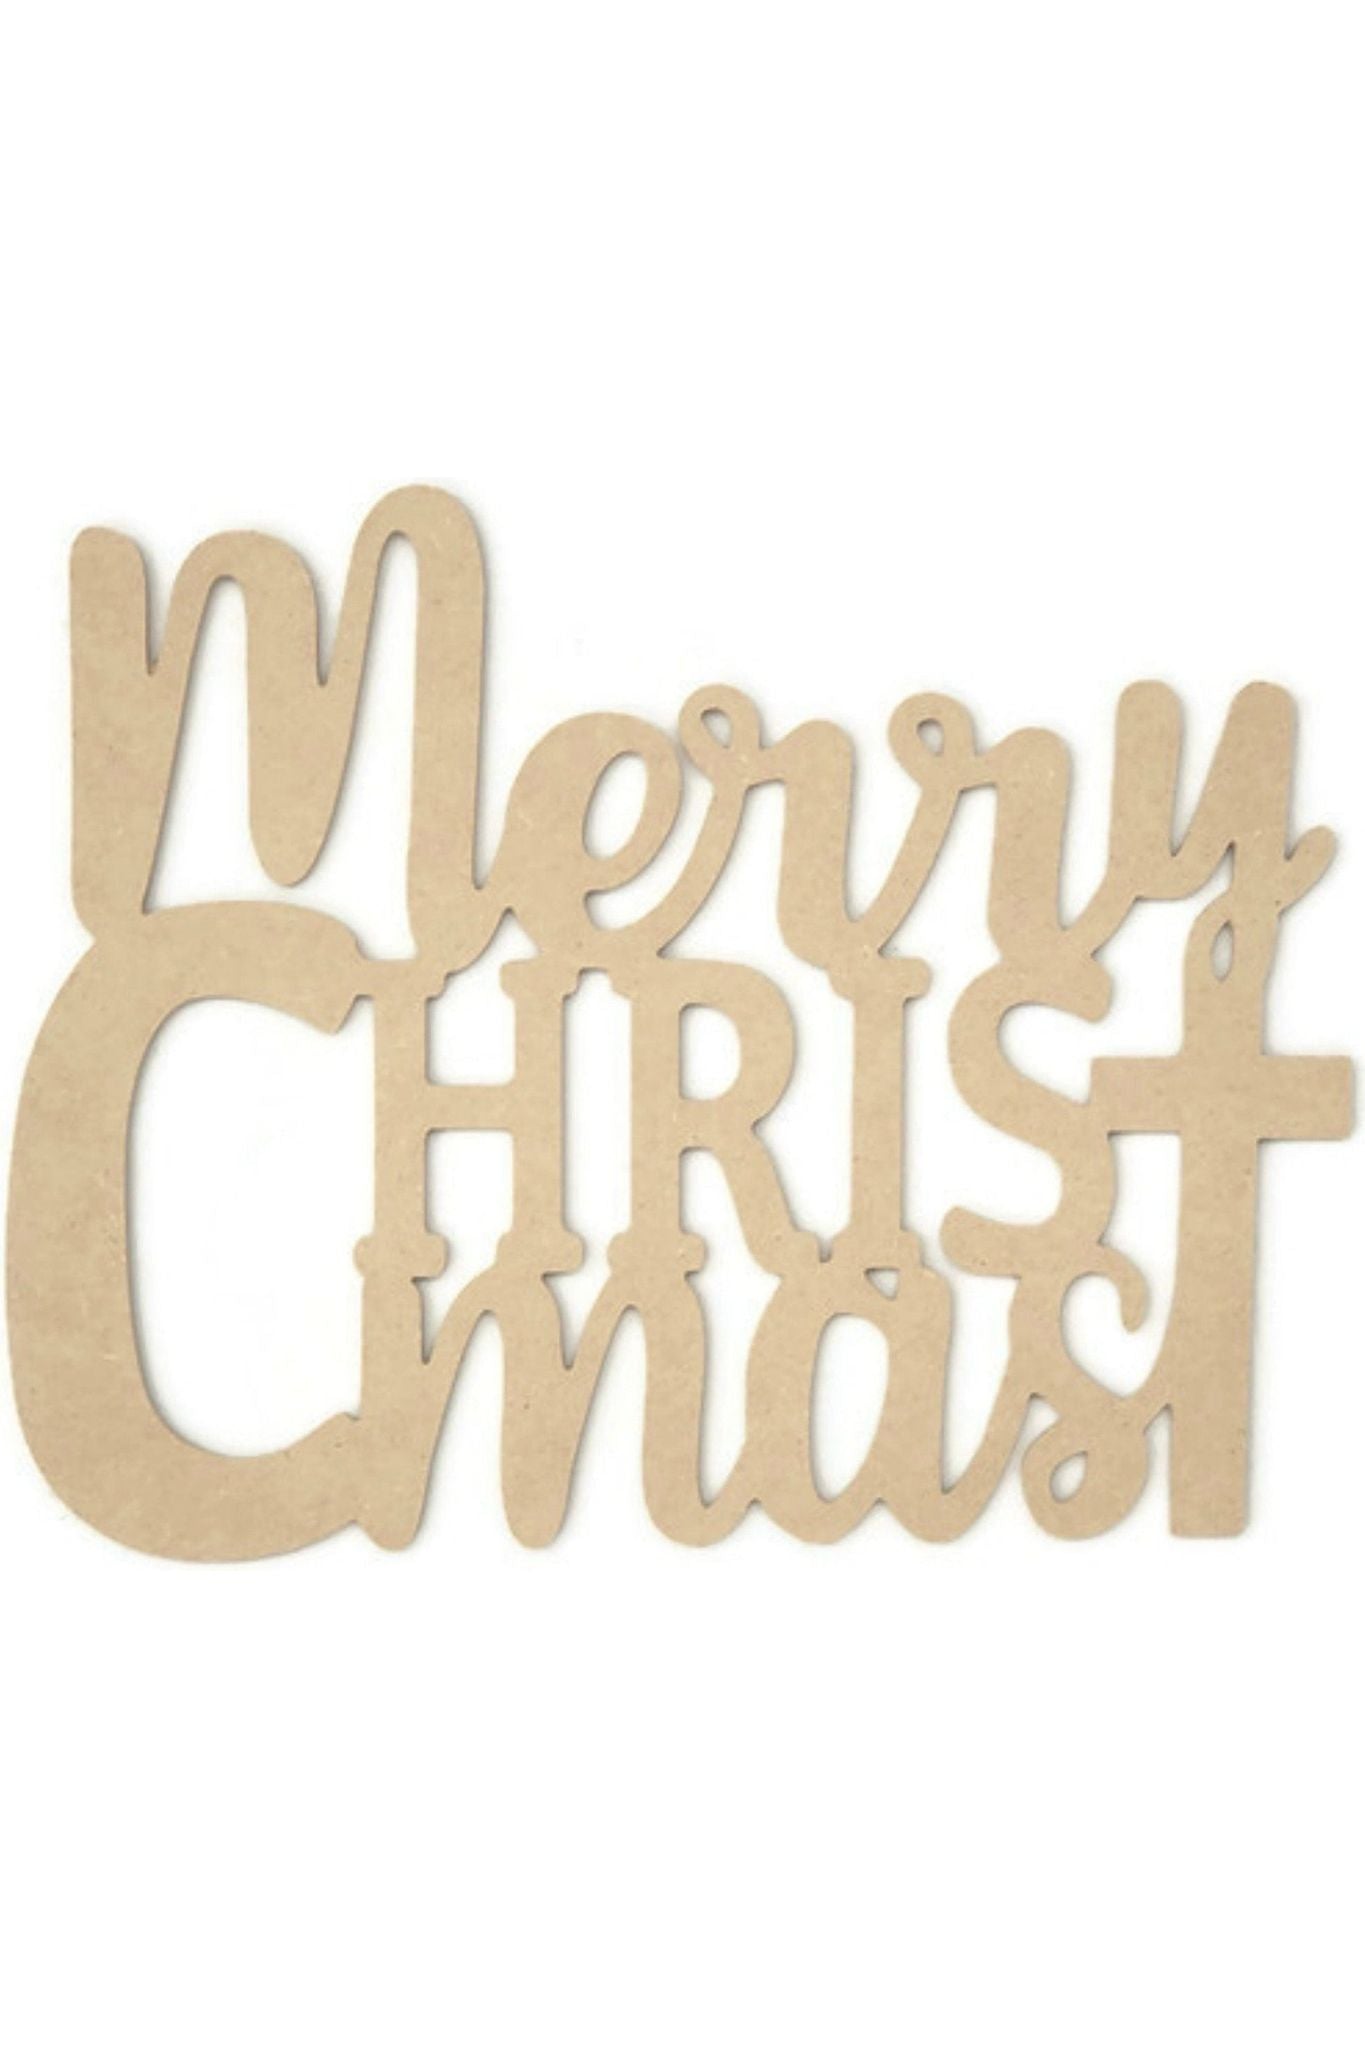 Shop For Merry Christmas Word Wood Cutout - Unfinished Wood